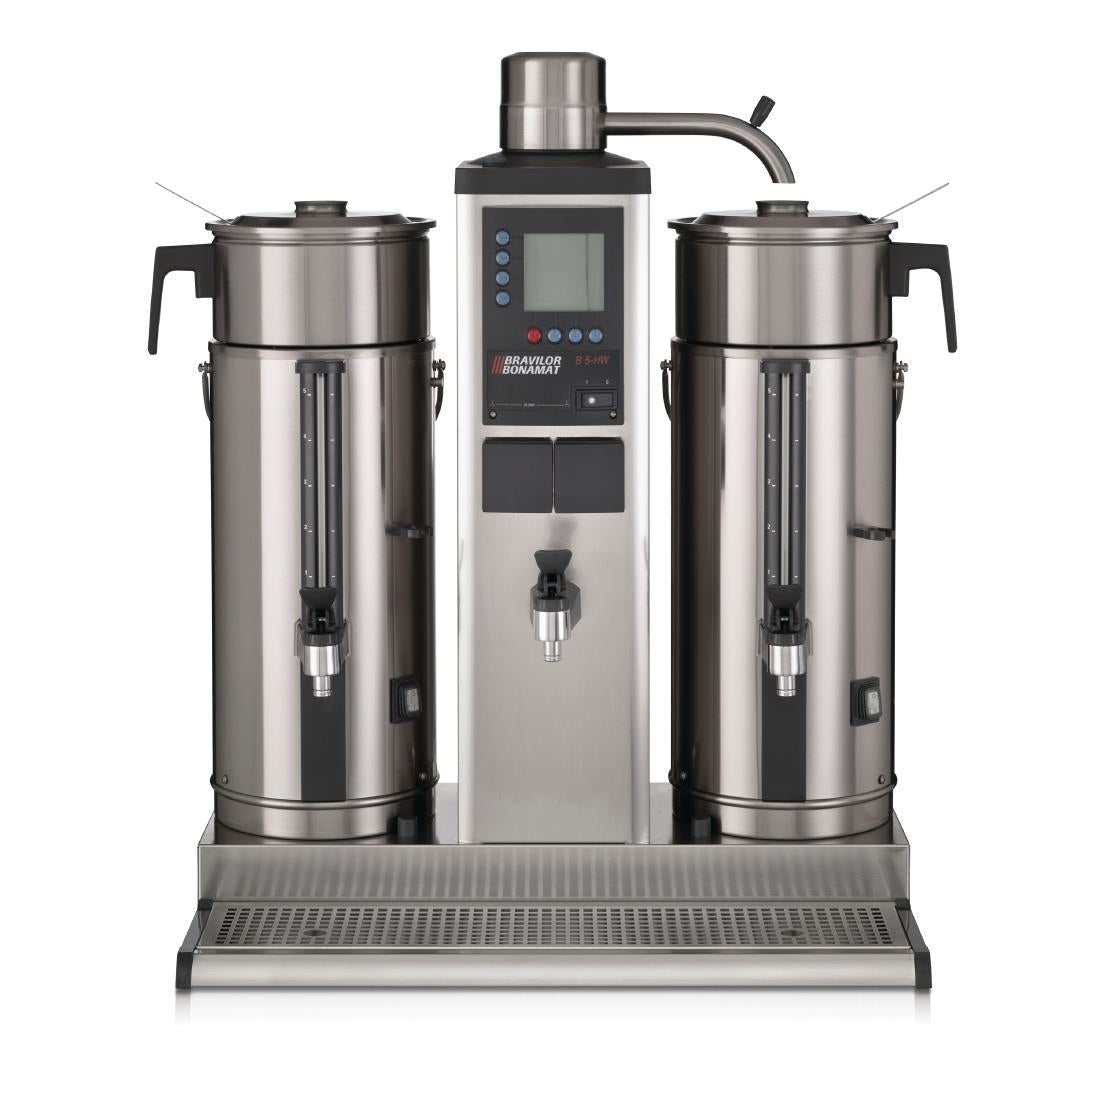 DC693-3P Bravilor B20 HW Bulk Coffee Brewer with 2x20Ltr Coffee Urns and Hot Water Tap 3 Phase JD Catering Equipment Solutions Ltd